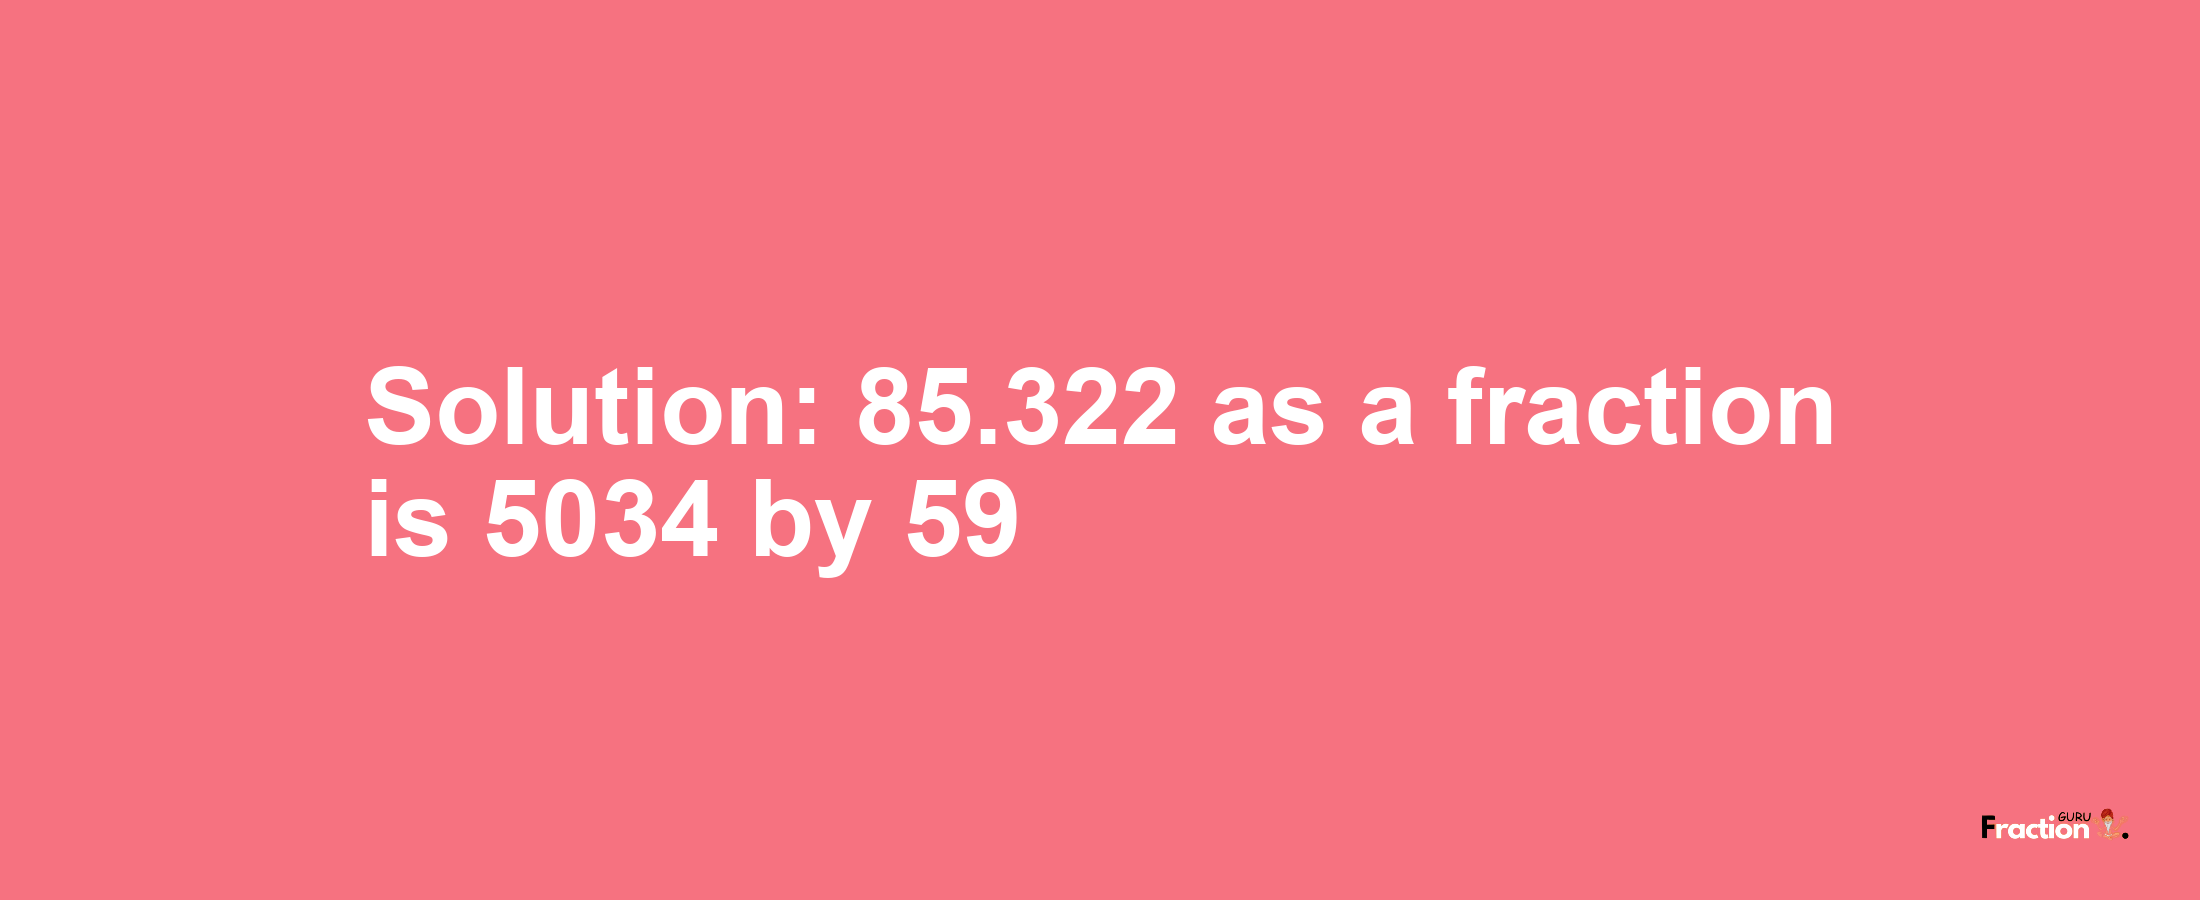 Solution:85.322 as a fraction is 5034/59